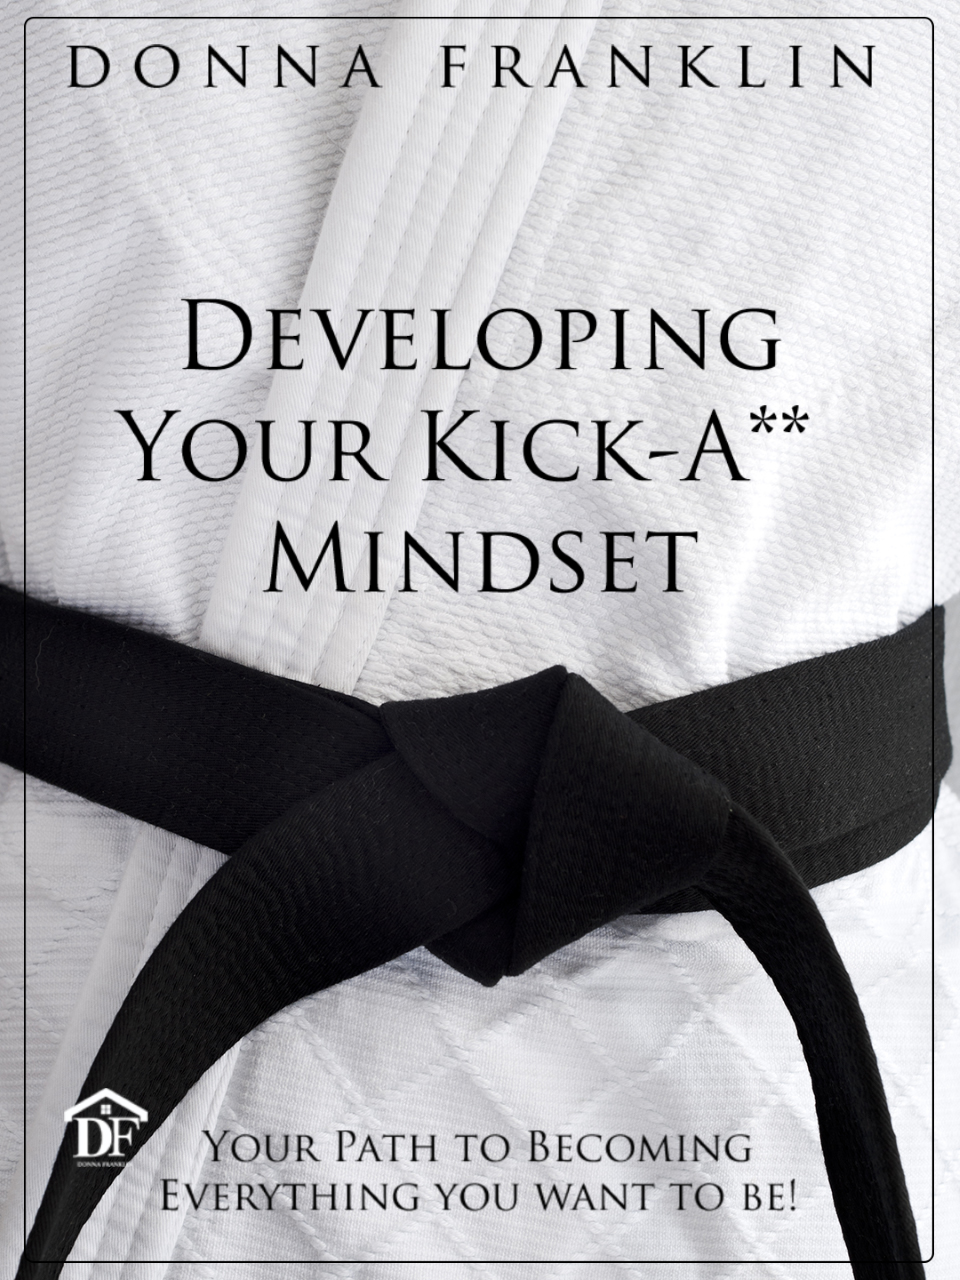 Developing Your Kick-A** Mindset